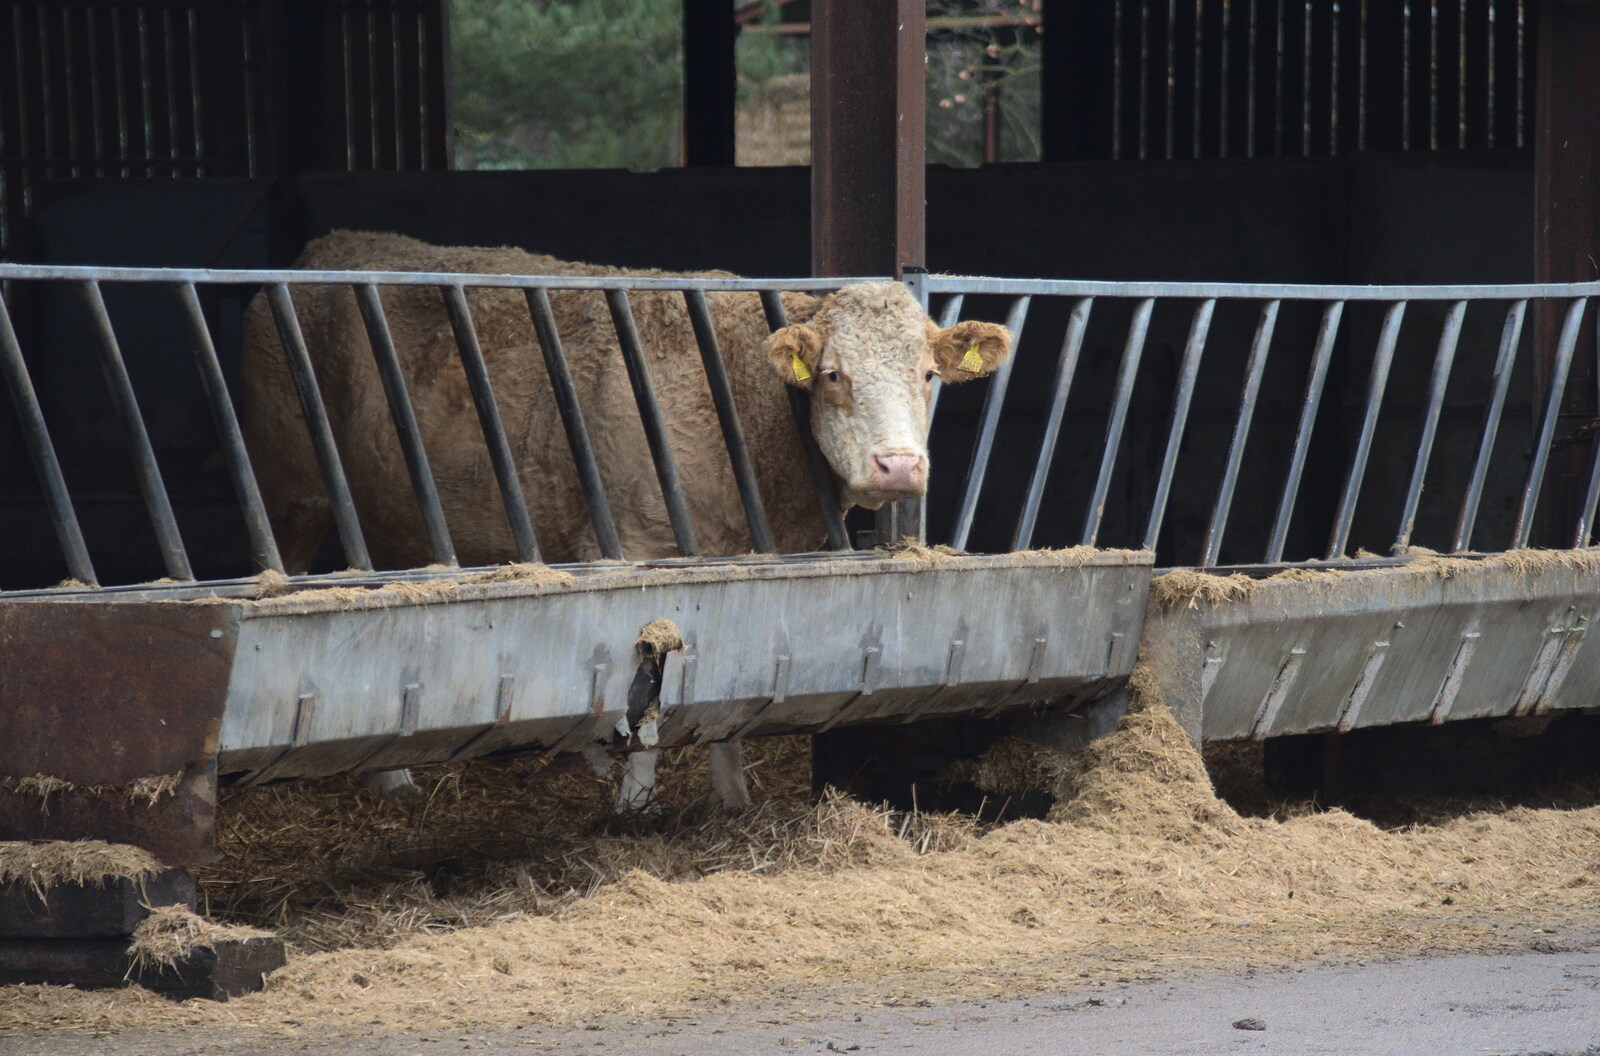 A sad cow looks out from its stall from More Frosty Rides and the Old Mink Sheds, Brome, Suffolk - 10th December 2020